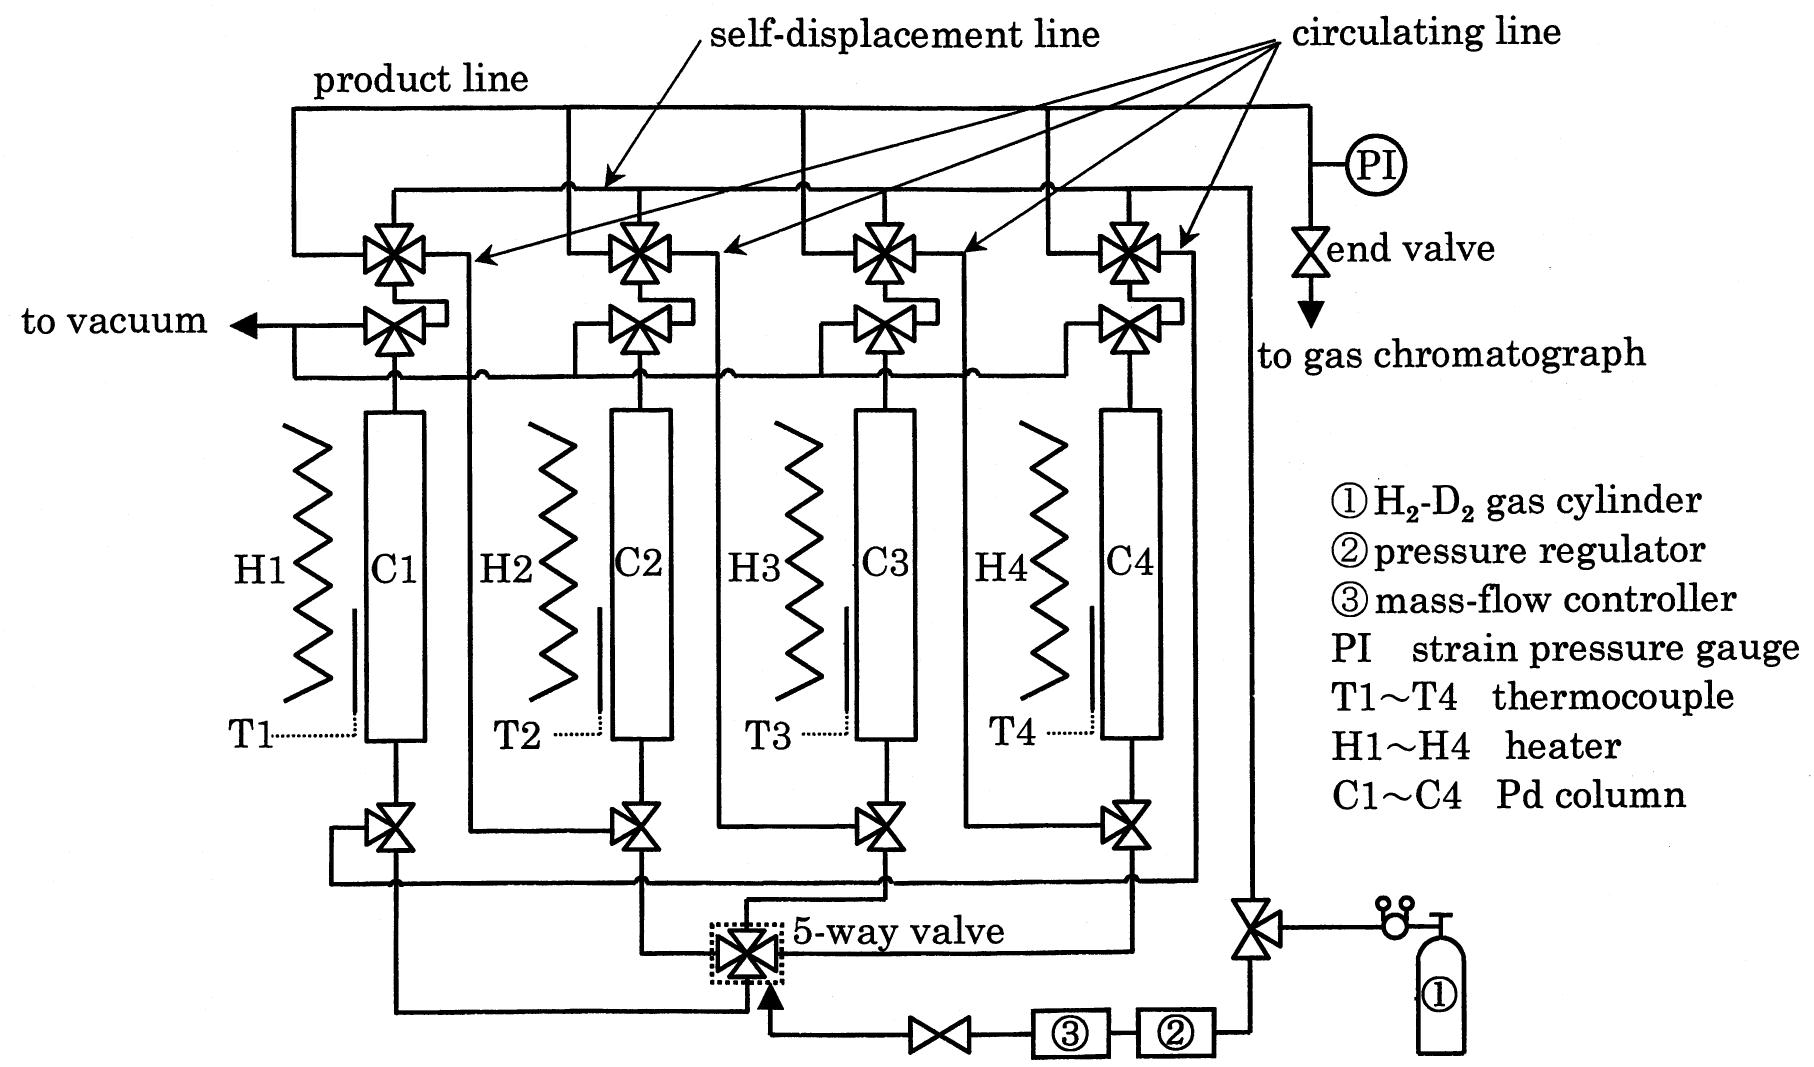 A schematic diagram of the experimental apparatus.